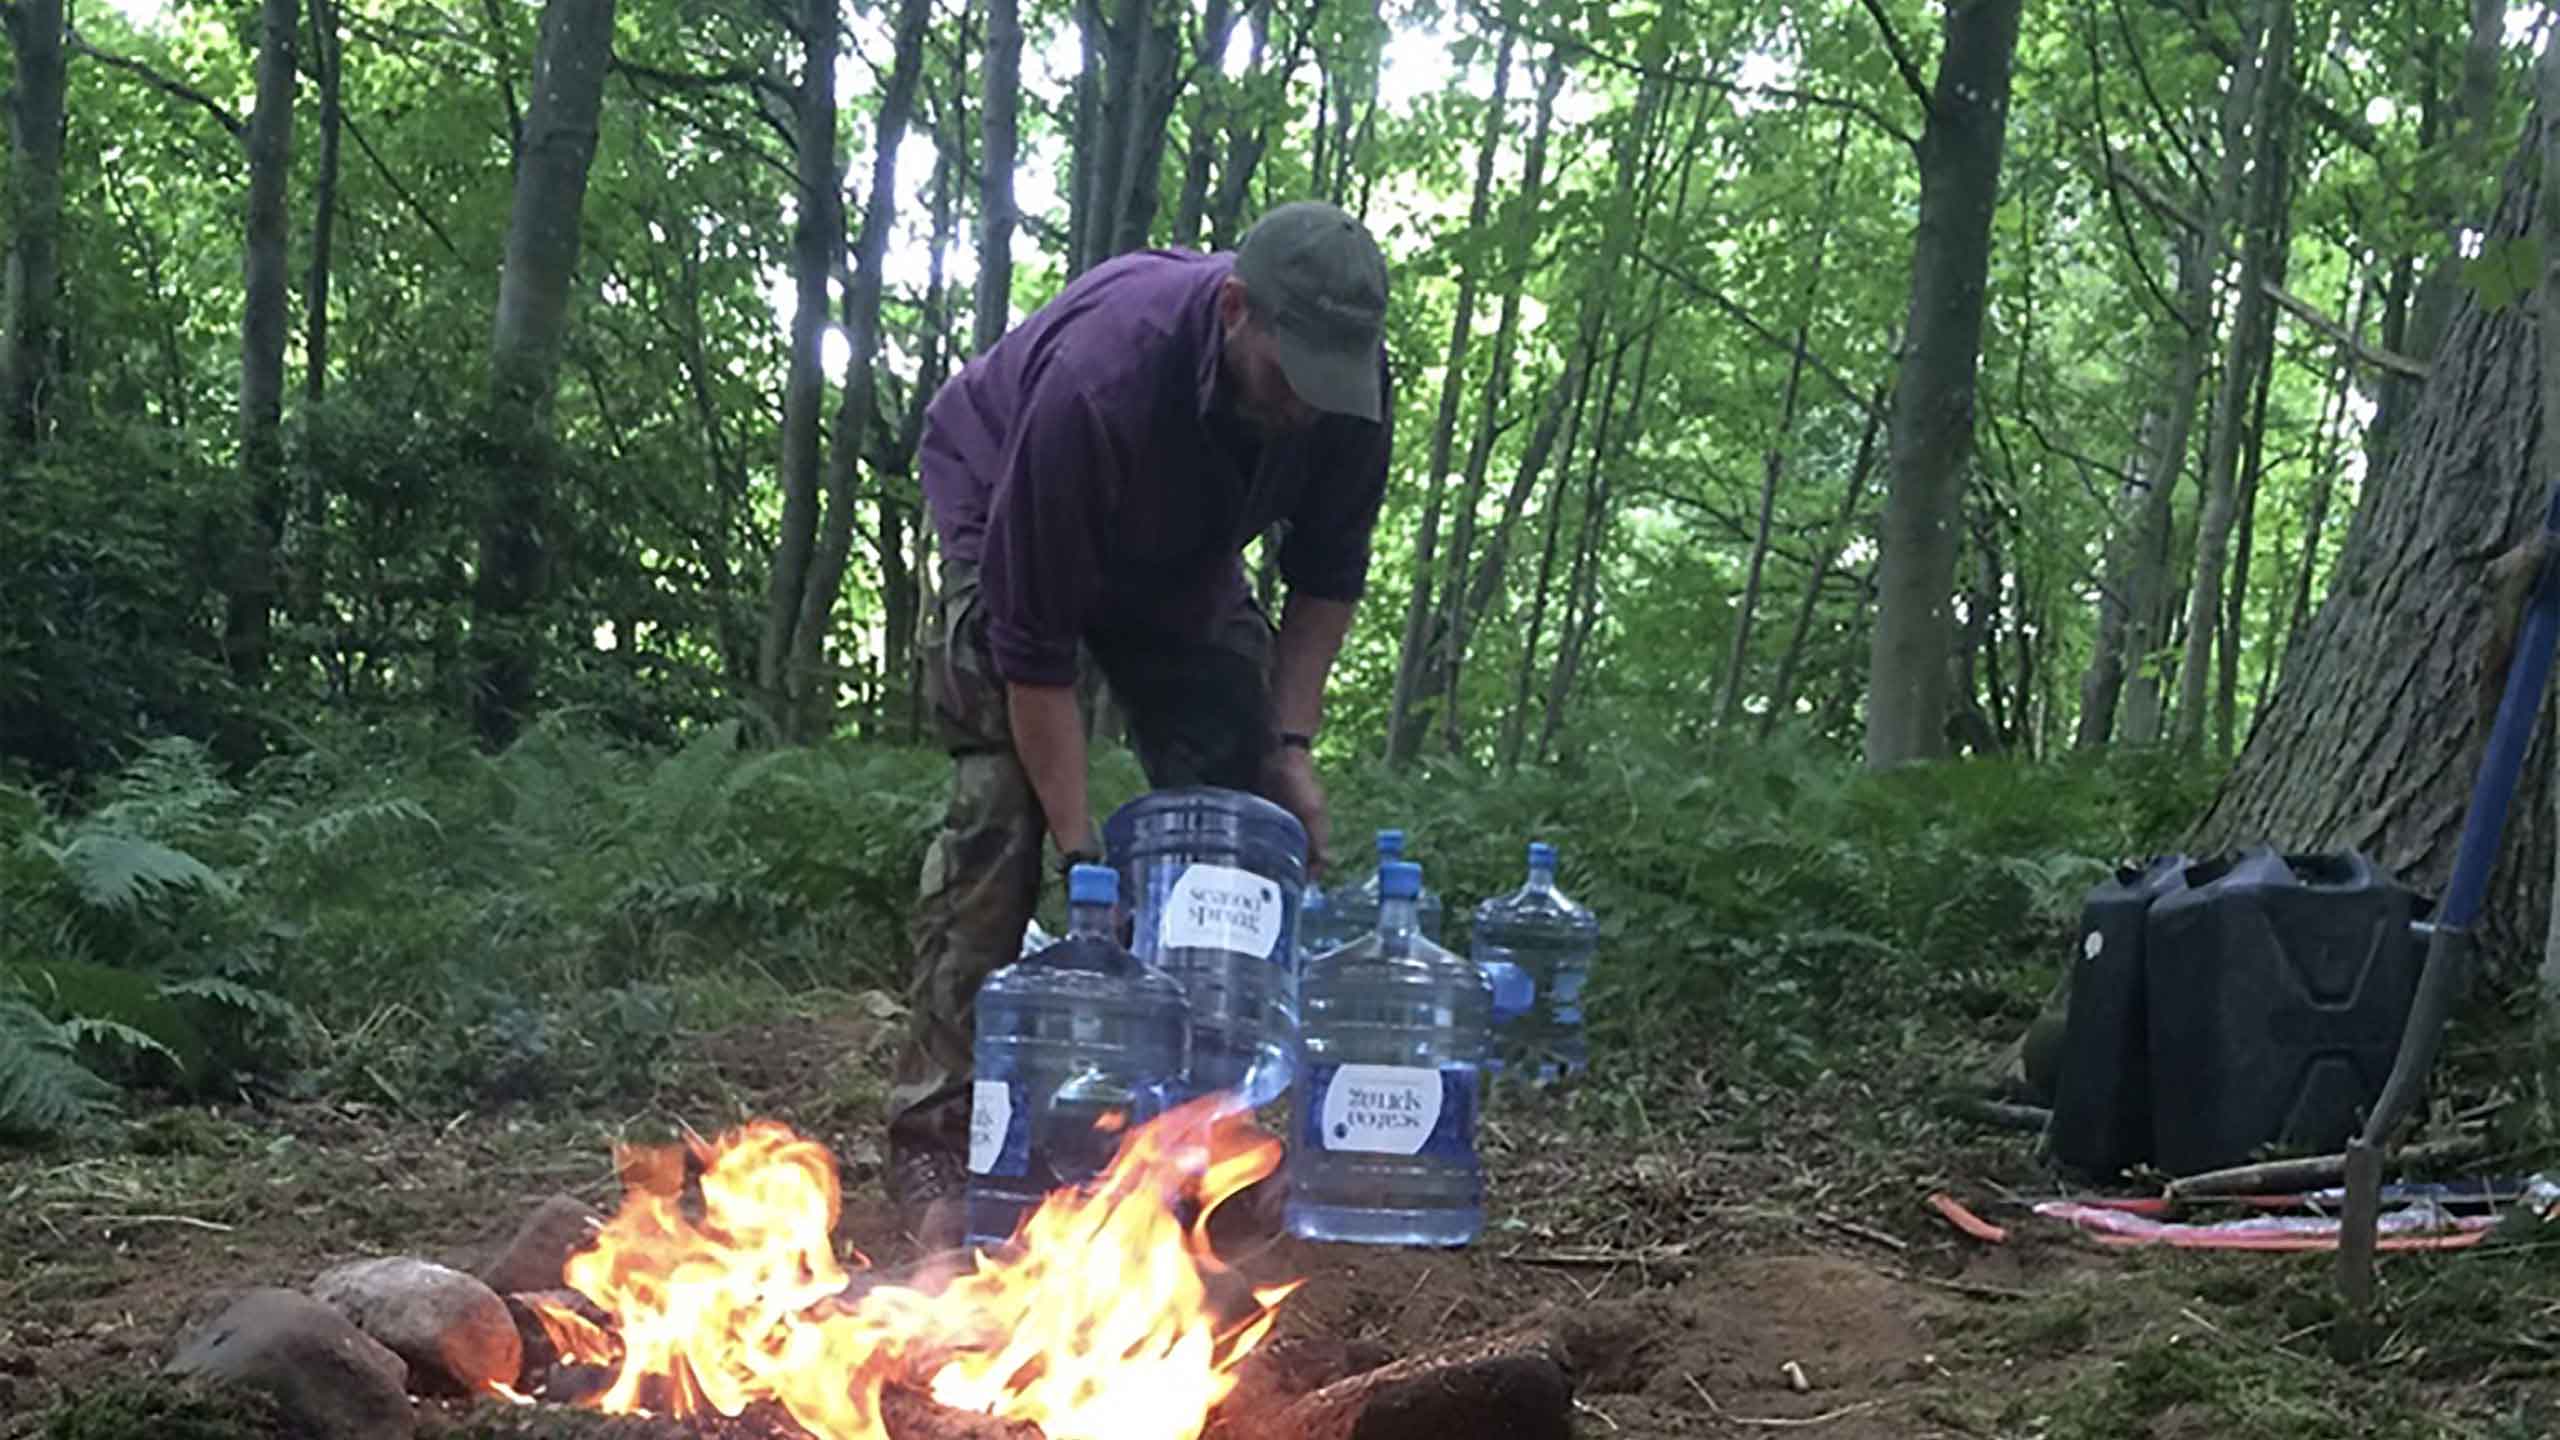 Seaton bottled water at survival camp